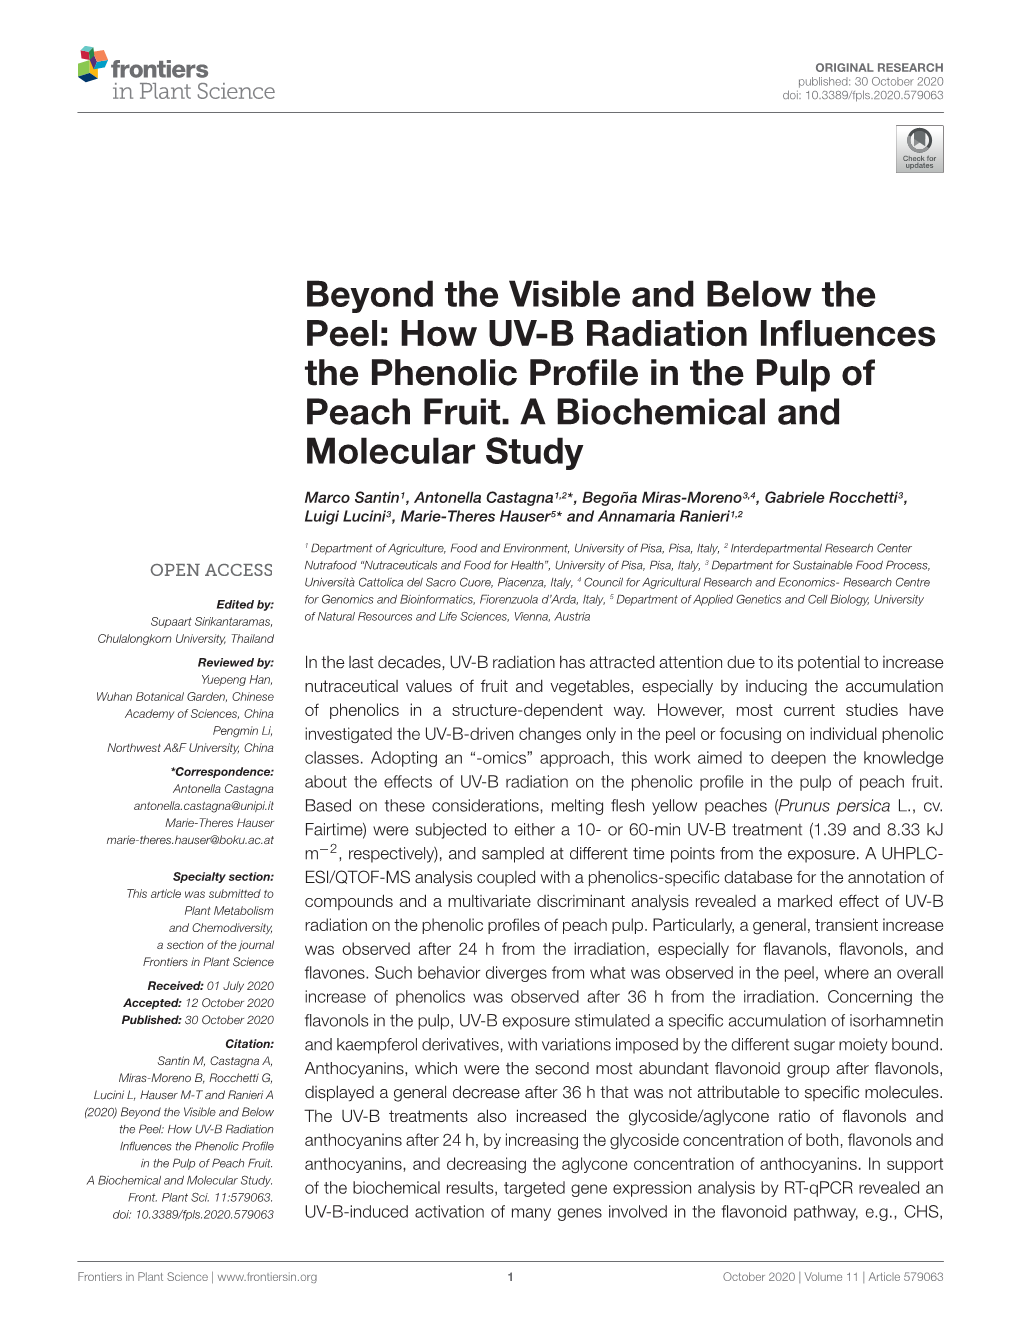 Beyond the Visible and Below the Peel: How UV-B Radiation Inﬂuences the Phenolic Proﬁle in the Pulp of Peach Fruit